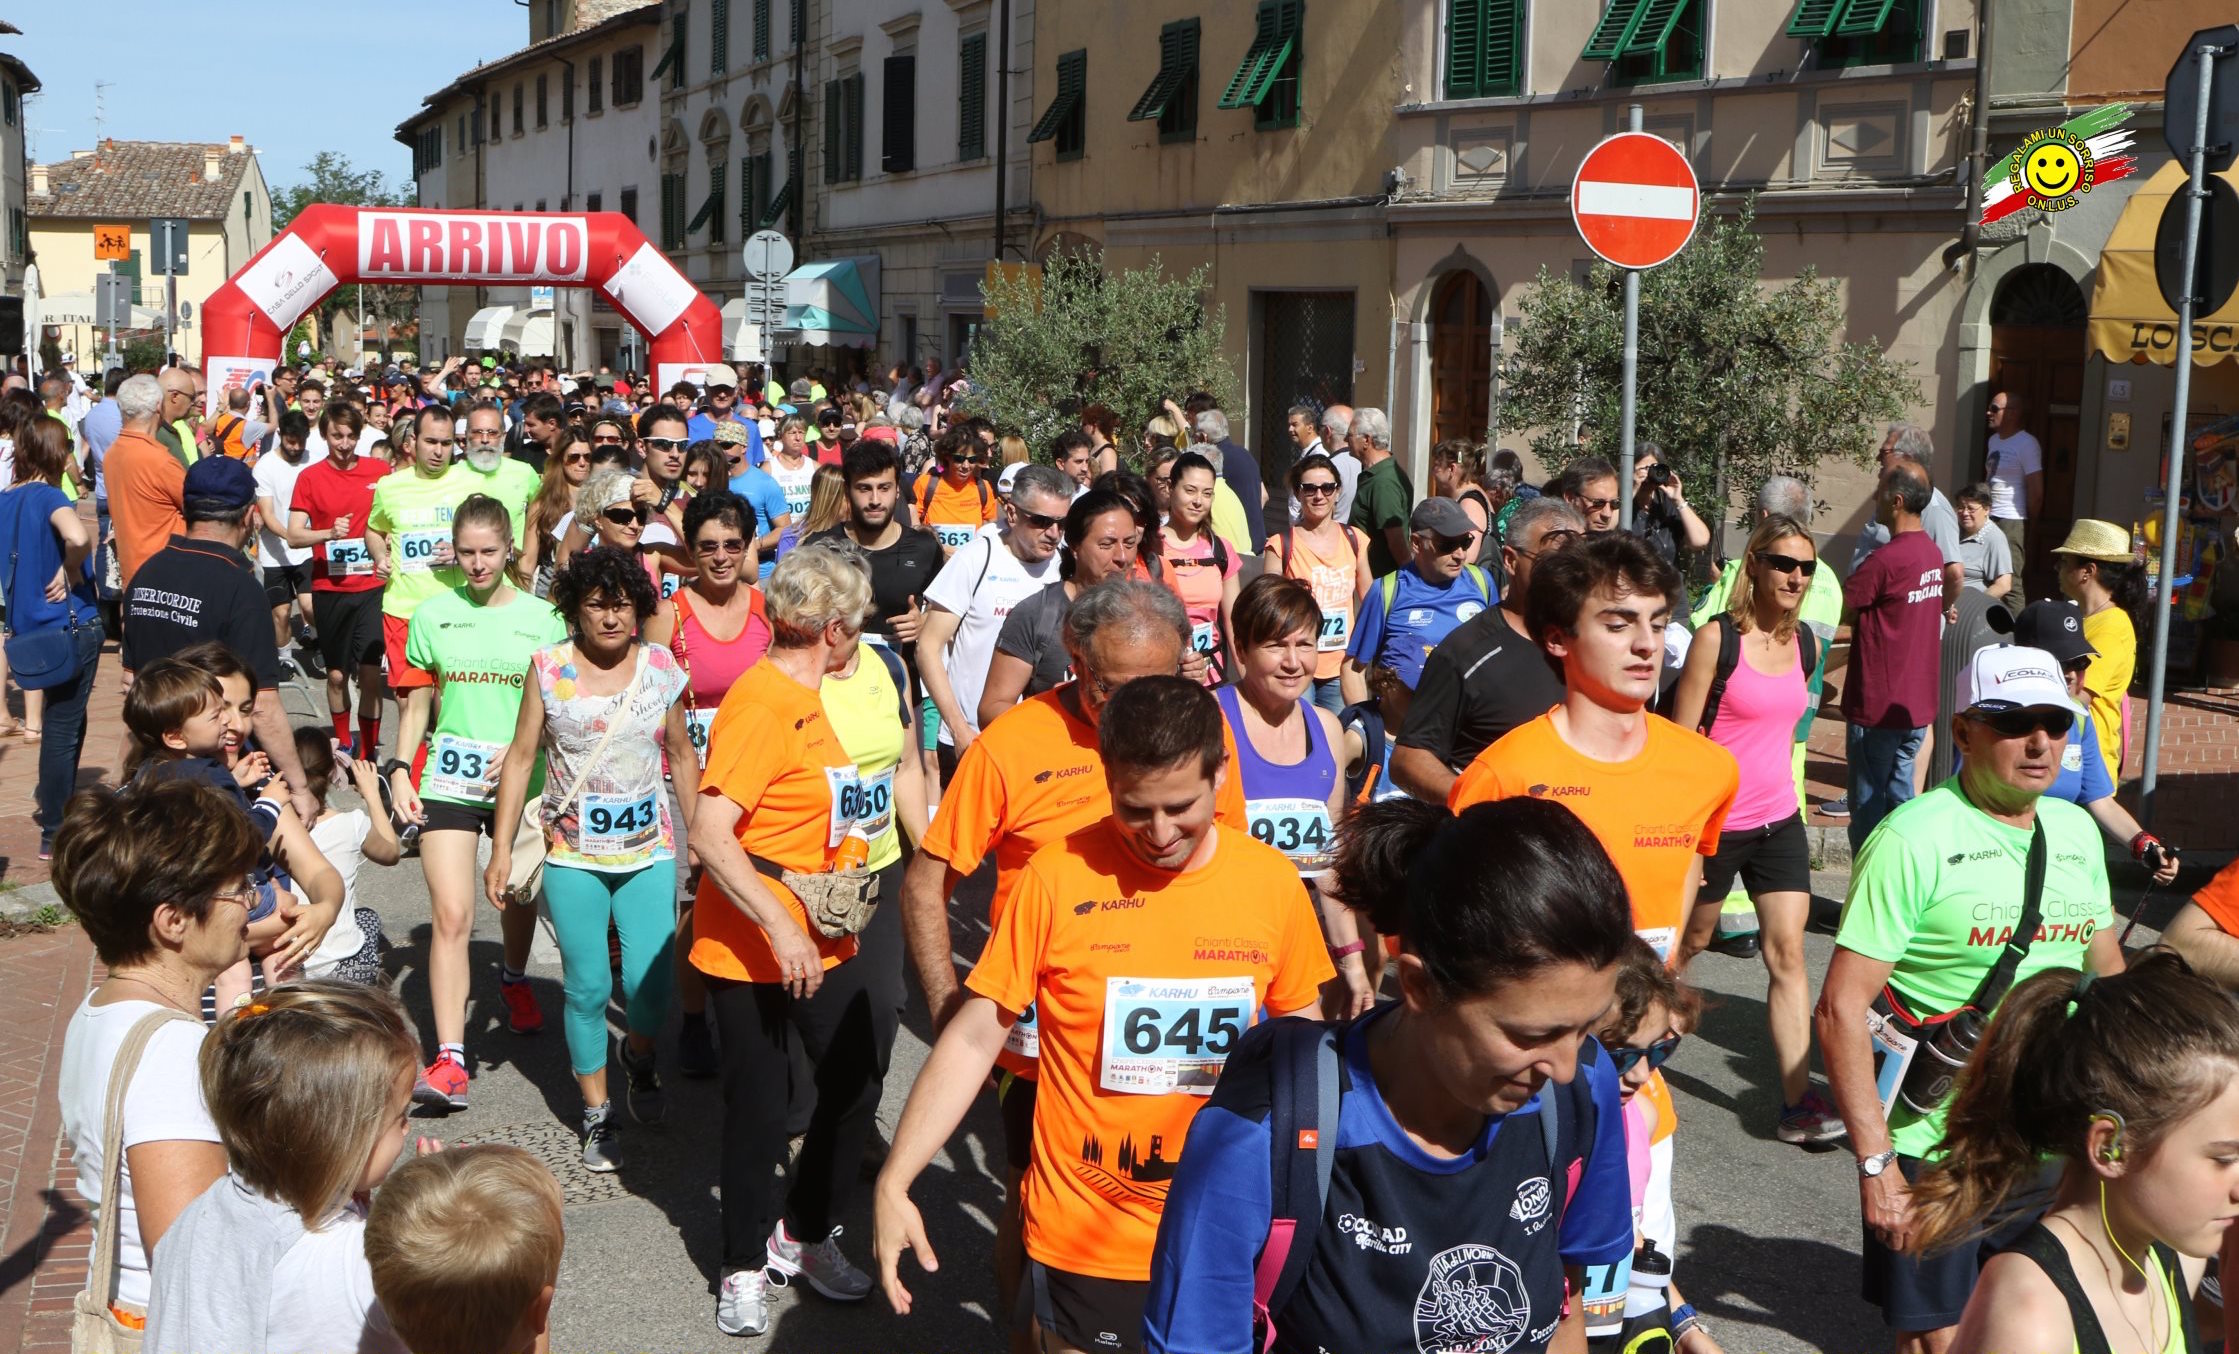 On 1 and 2 June 2019 the Chianti Classico Marathon in Mercatale Val di Pesa with runners from 31 nations